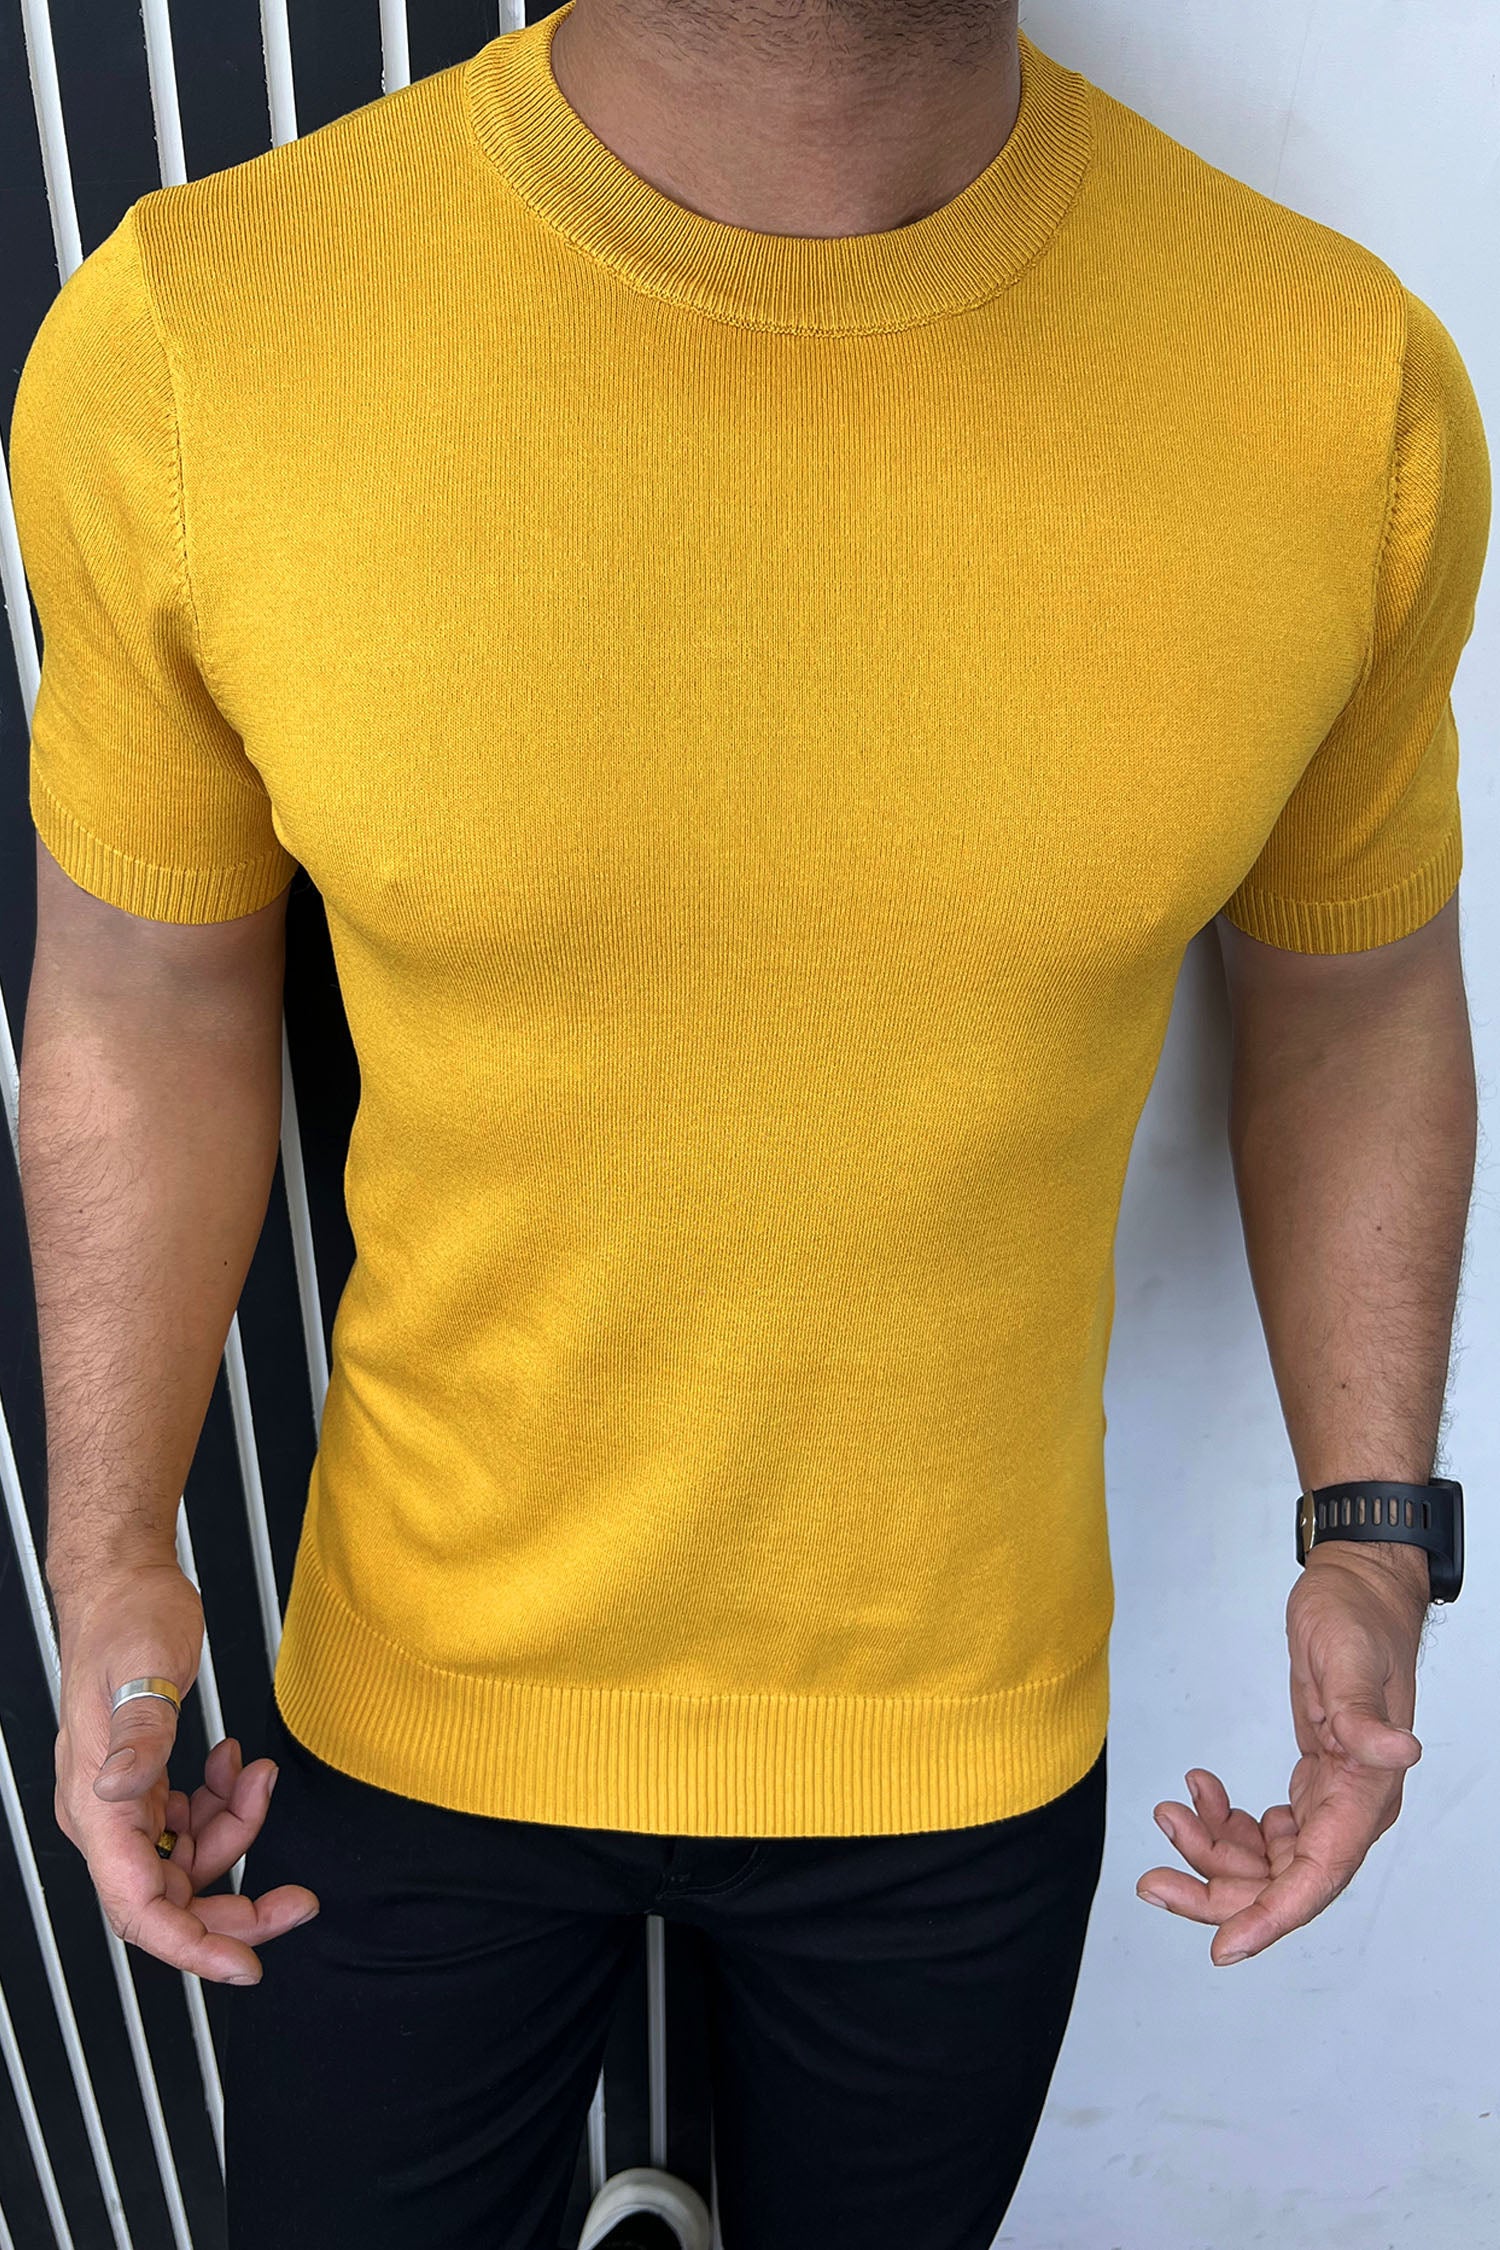 Round neck knitted Tees